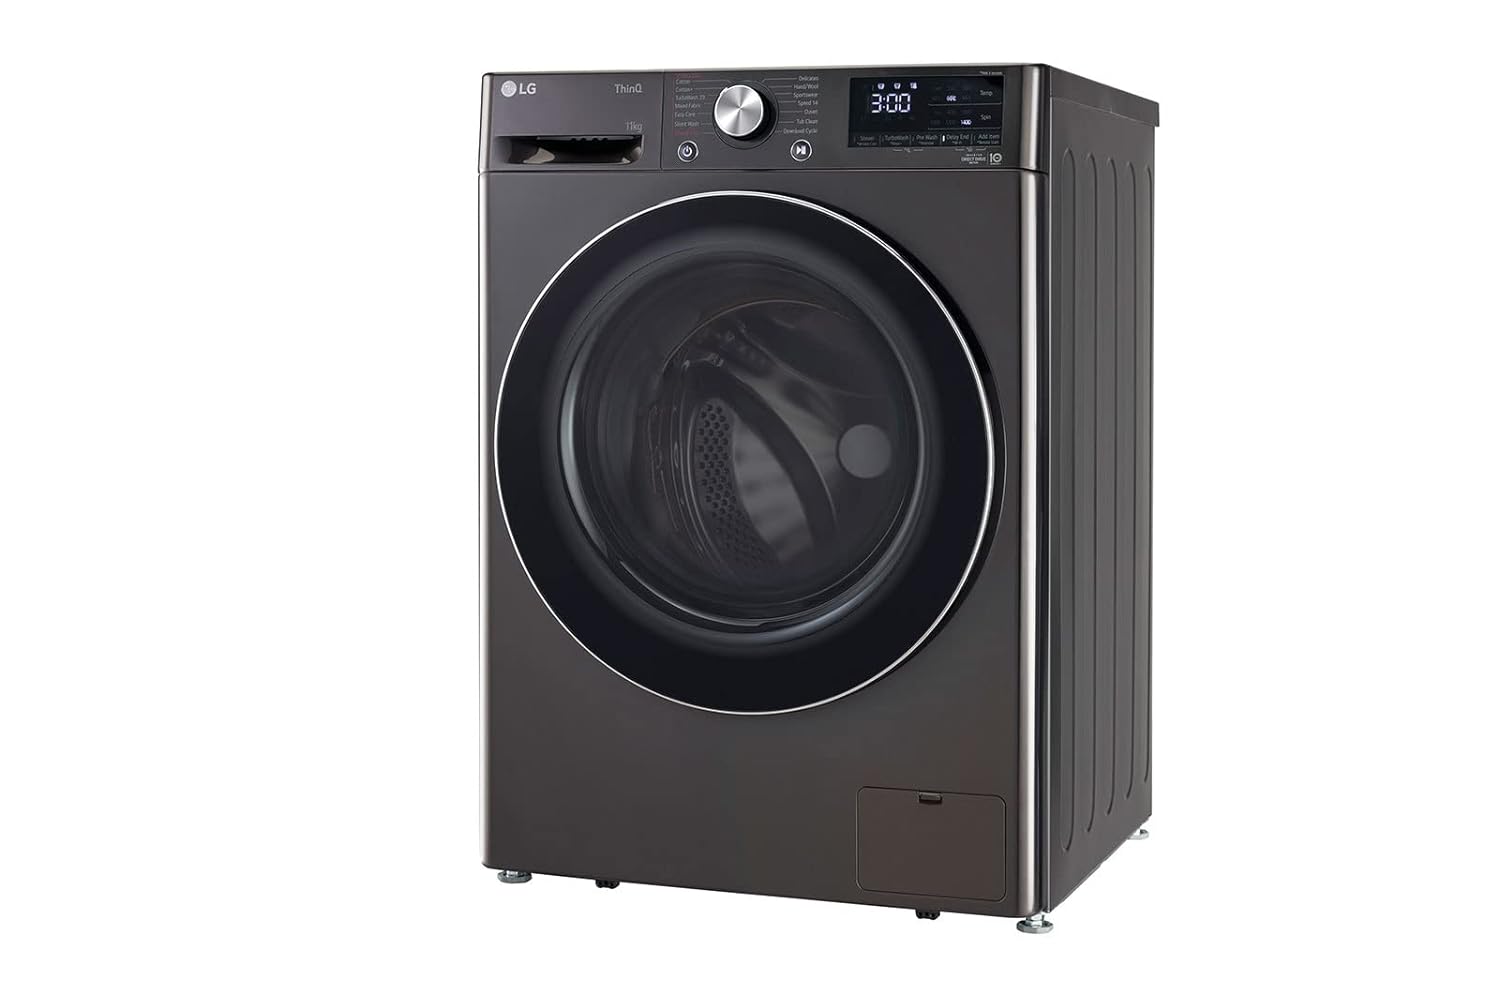 LG 11 Kg FHP1411Z9B 5 Star Inverter Wi-Fi Fully-Automatic Front Load Washing Machine with In-Built Heater (FHP1411Z9B, Black VCM, AI DD Technology, 1400 RPM & Steam+) - Mahajan Electronics Online